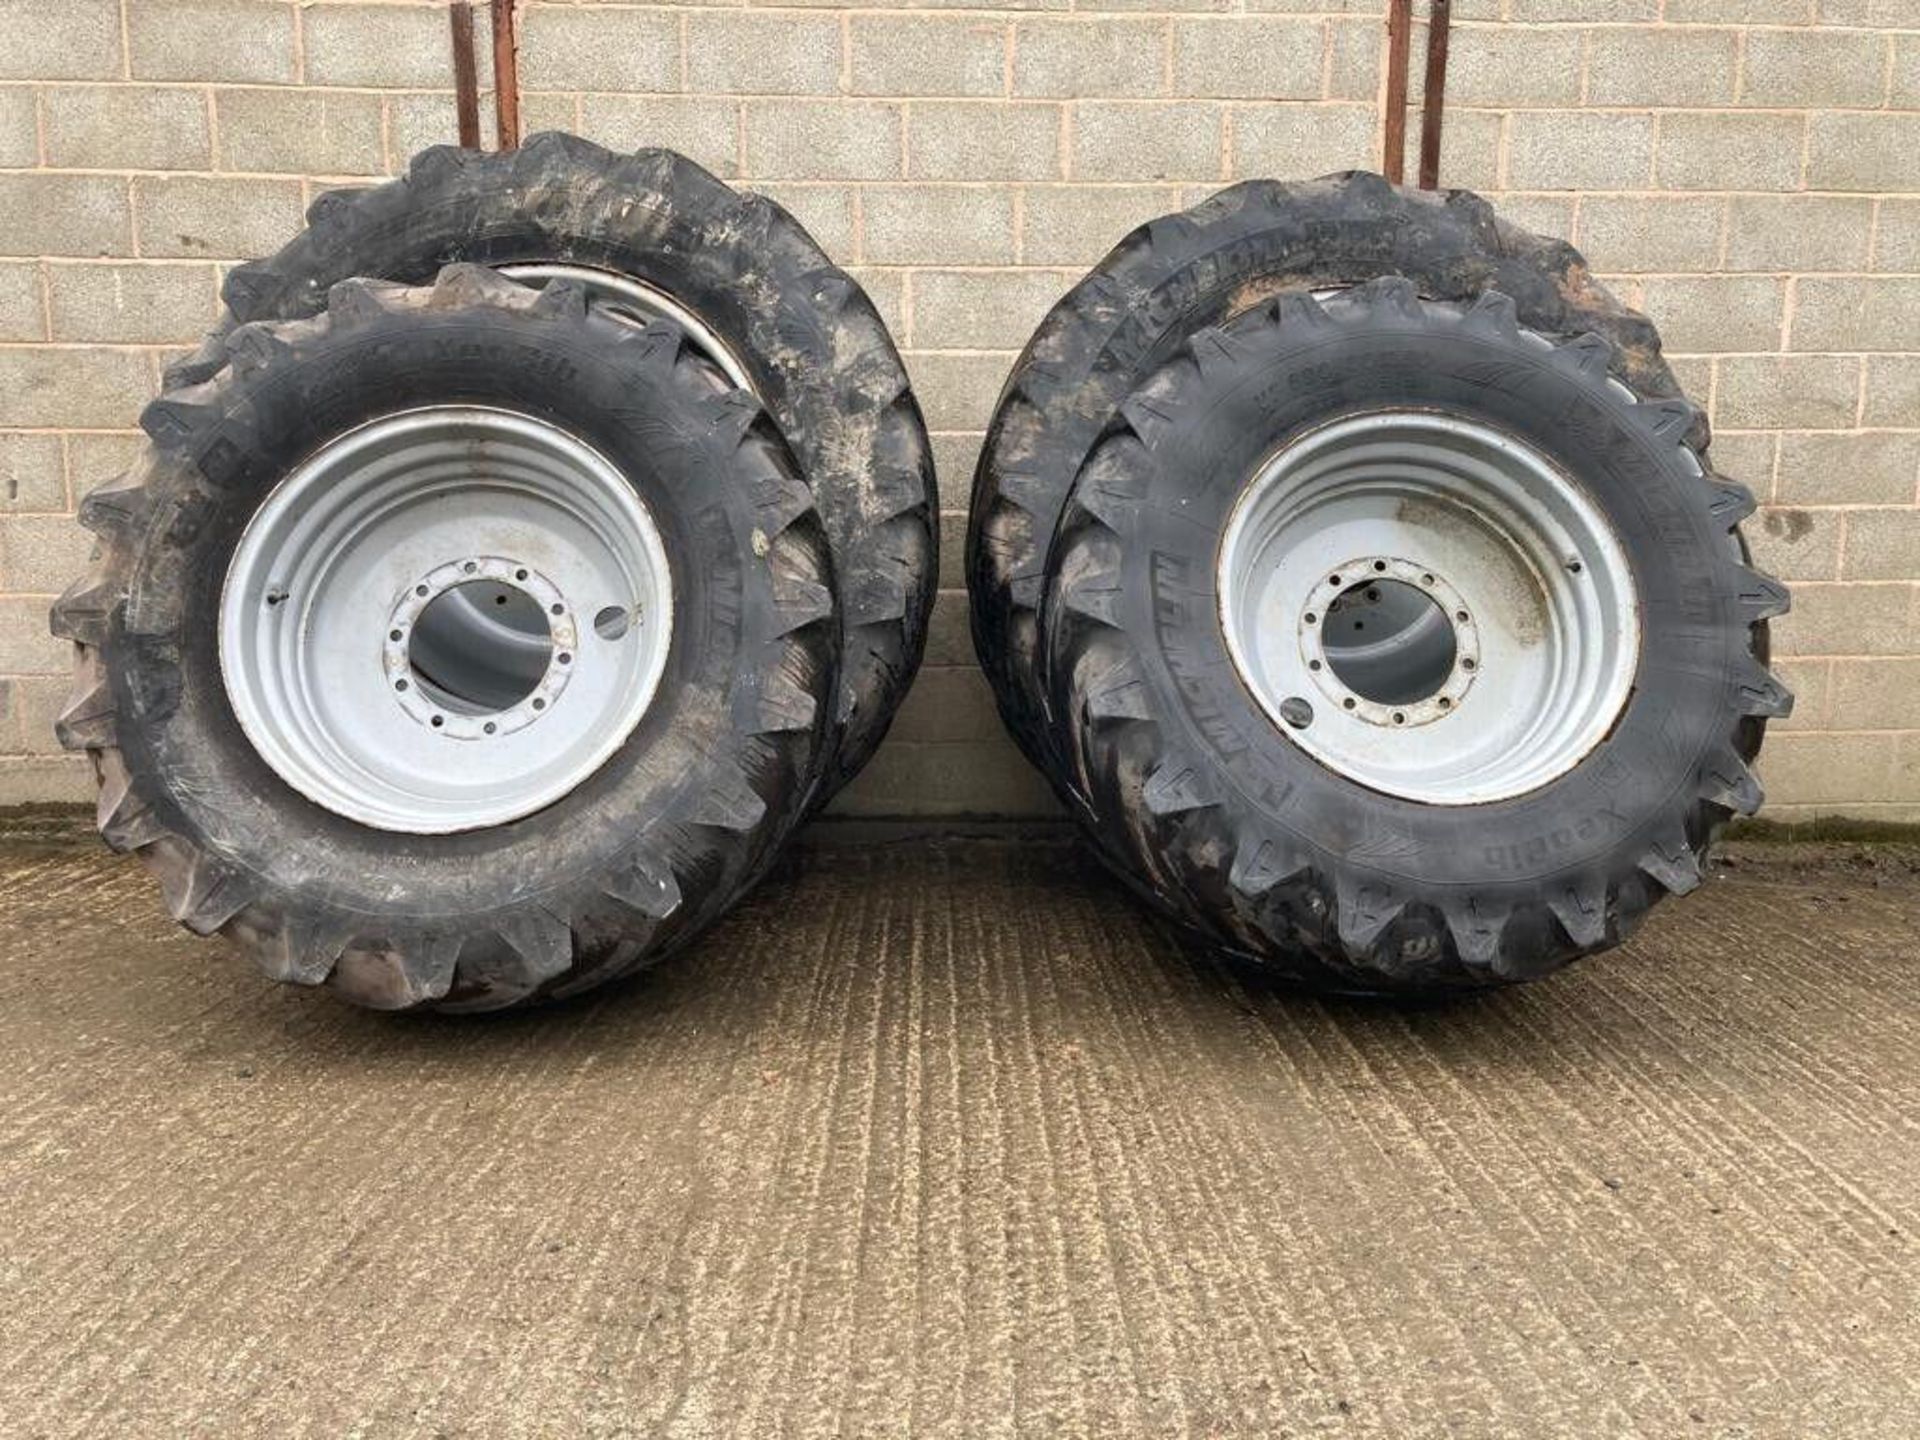 Set of 710/60R42 Michelin Tyres & 600/60R30 Michelin Tyres on Case Wheels - (Shropshire)